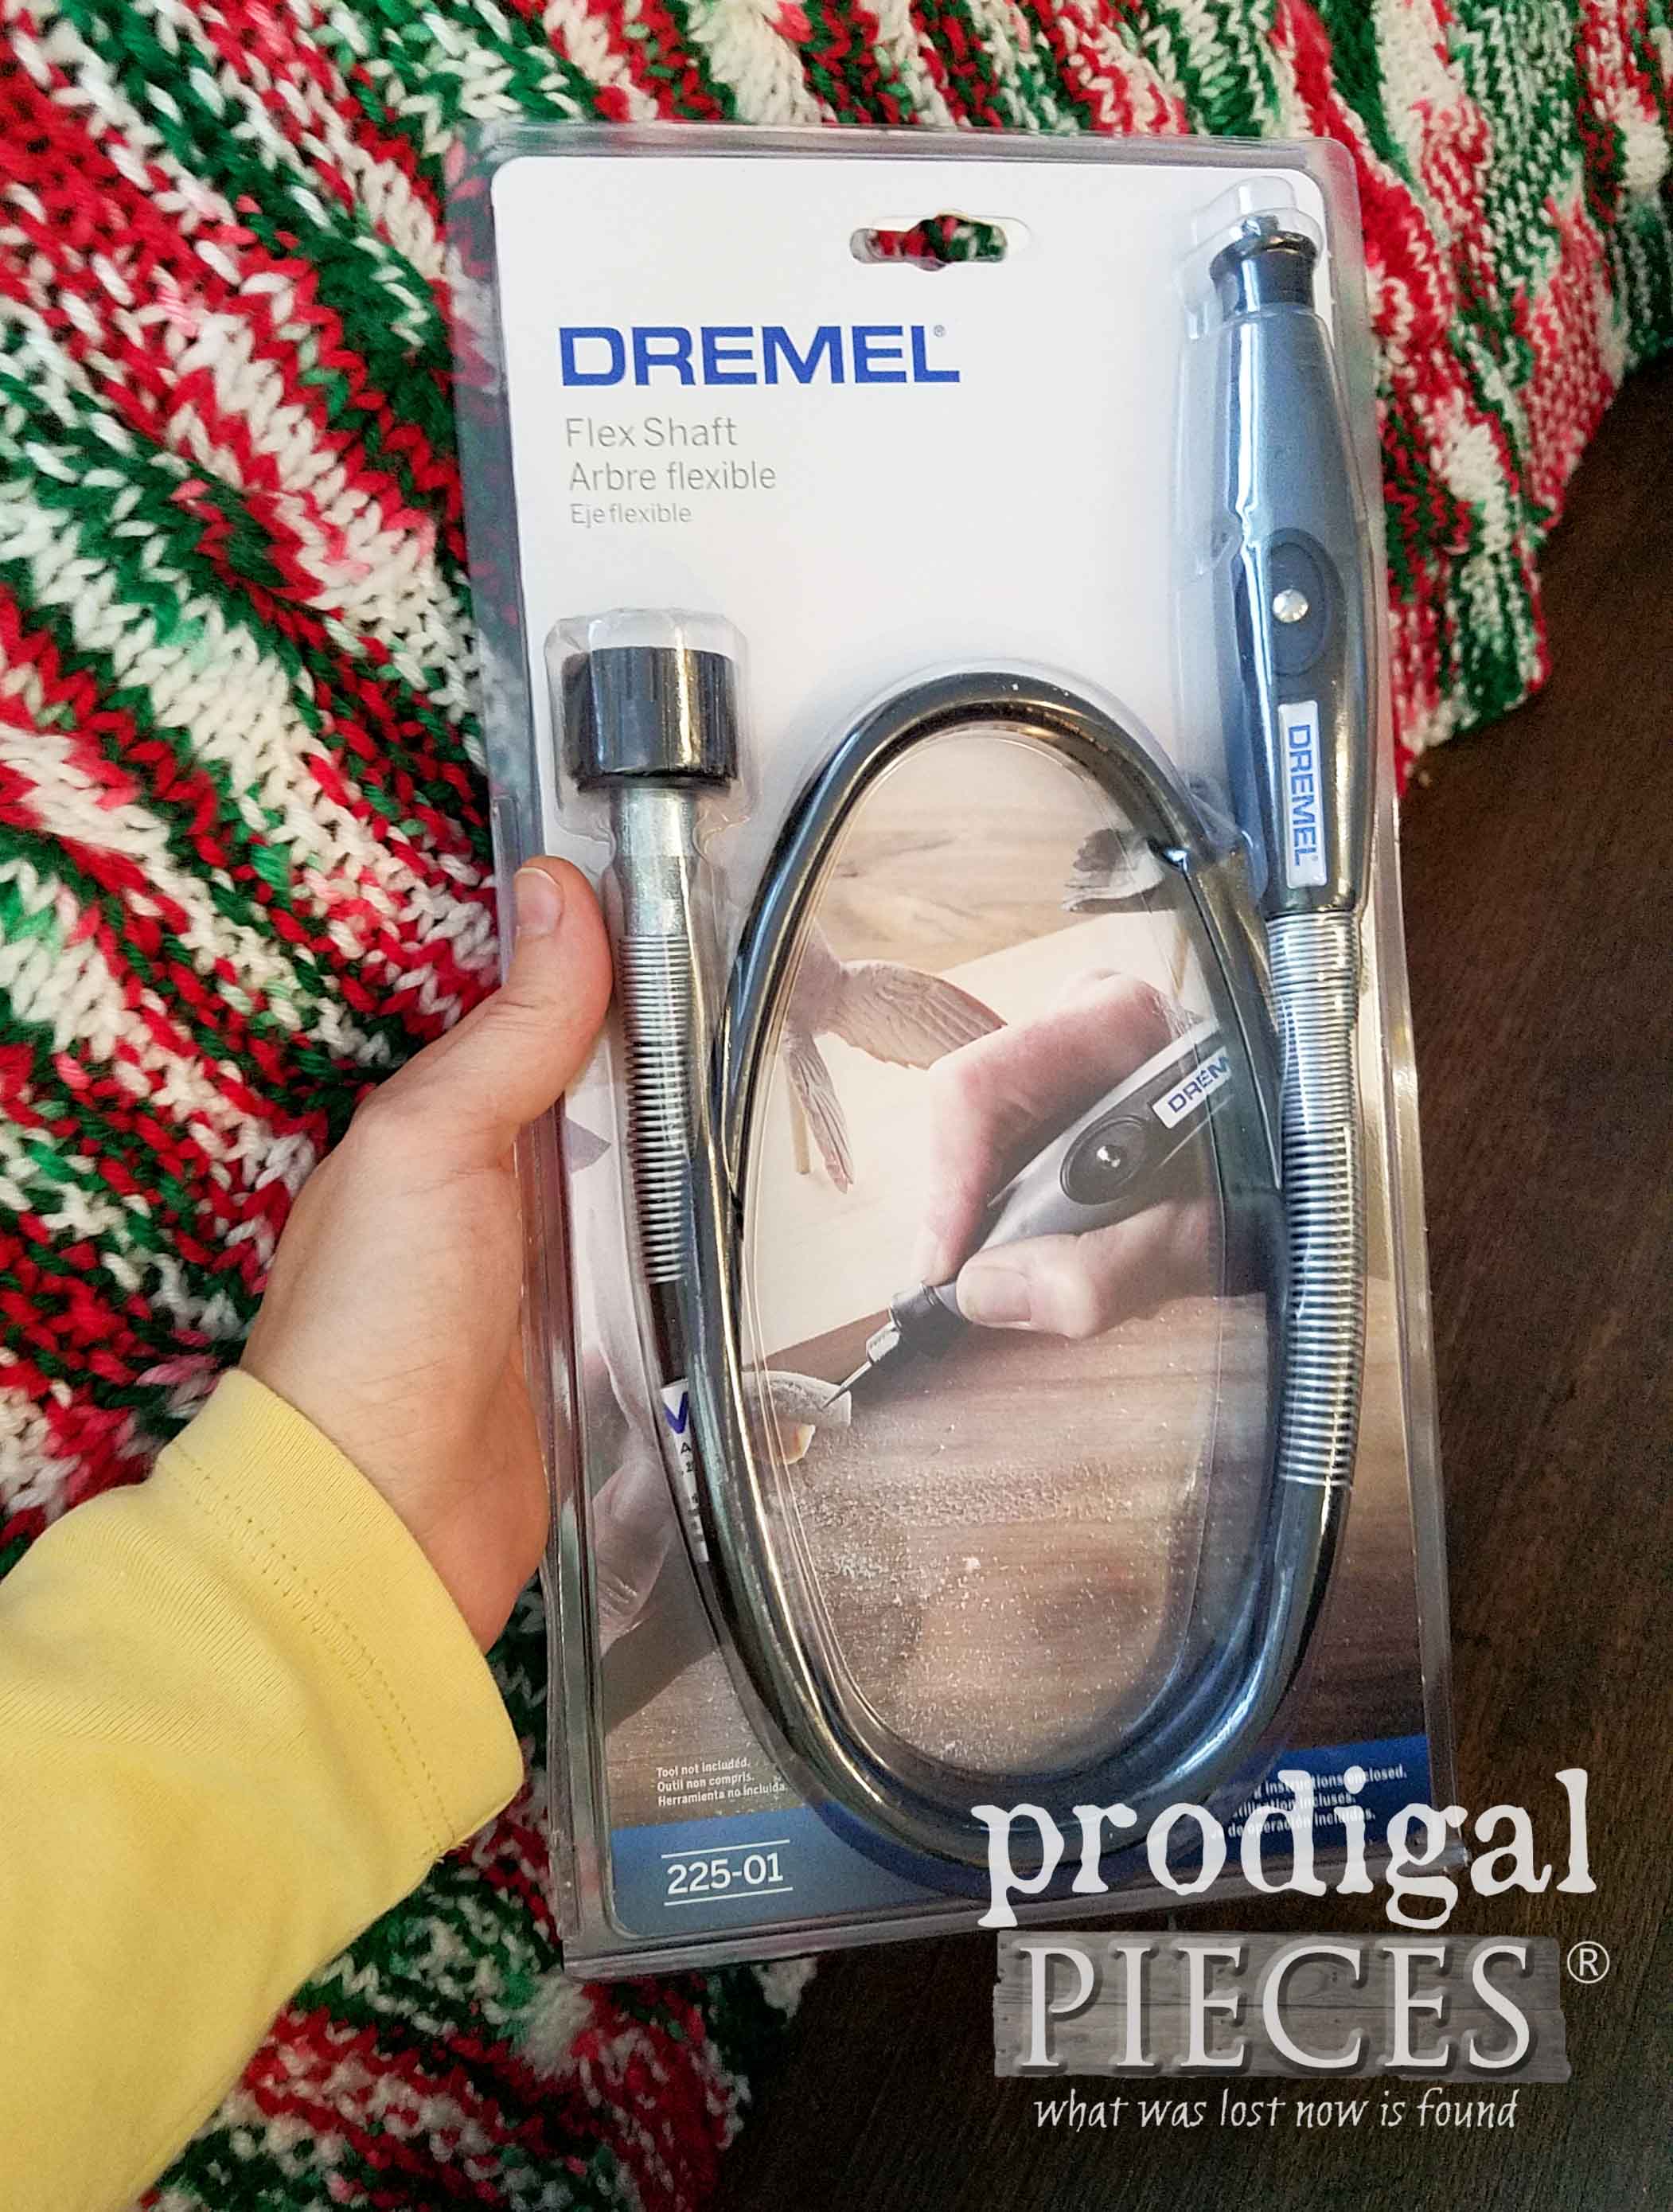 Dremel Flex Shaft for Crafts and Detailed Work by Prodigal Pieces | prodigalpieces.com